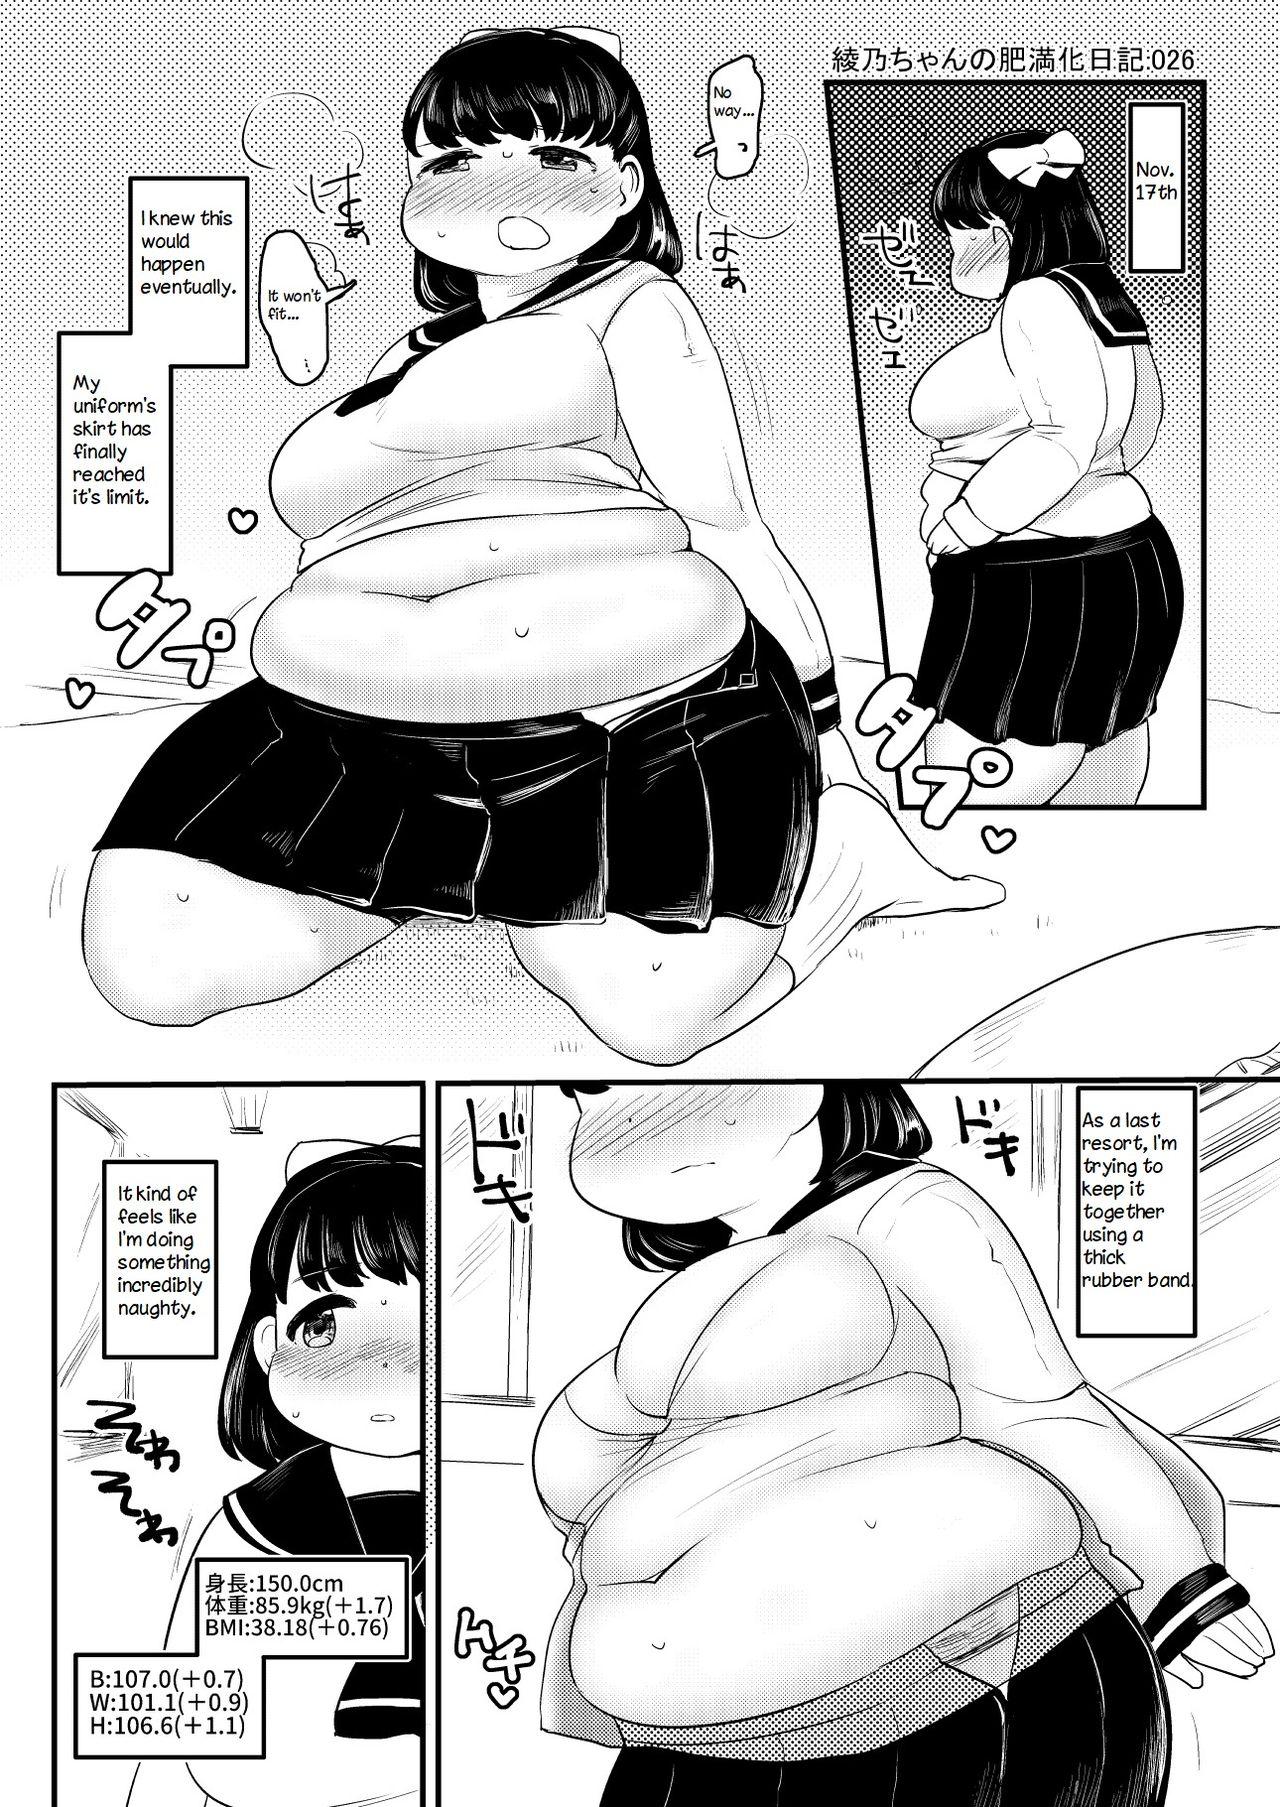 Ayano's Weight Gain Diary [English] Torrent(181 pages) 25